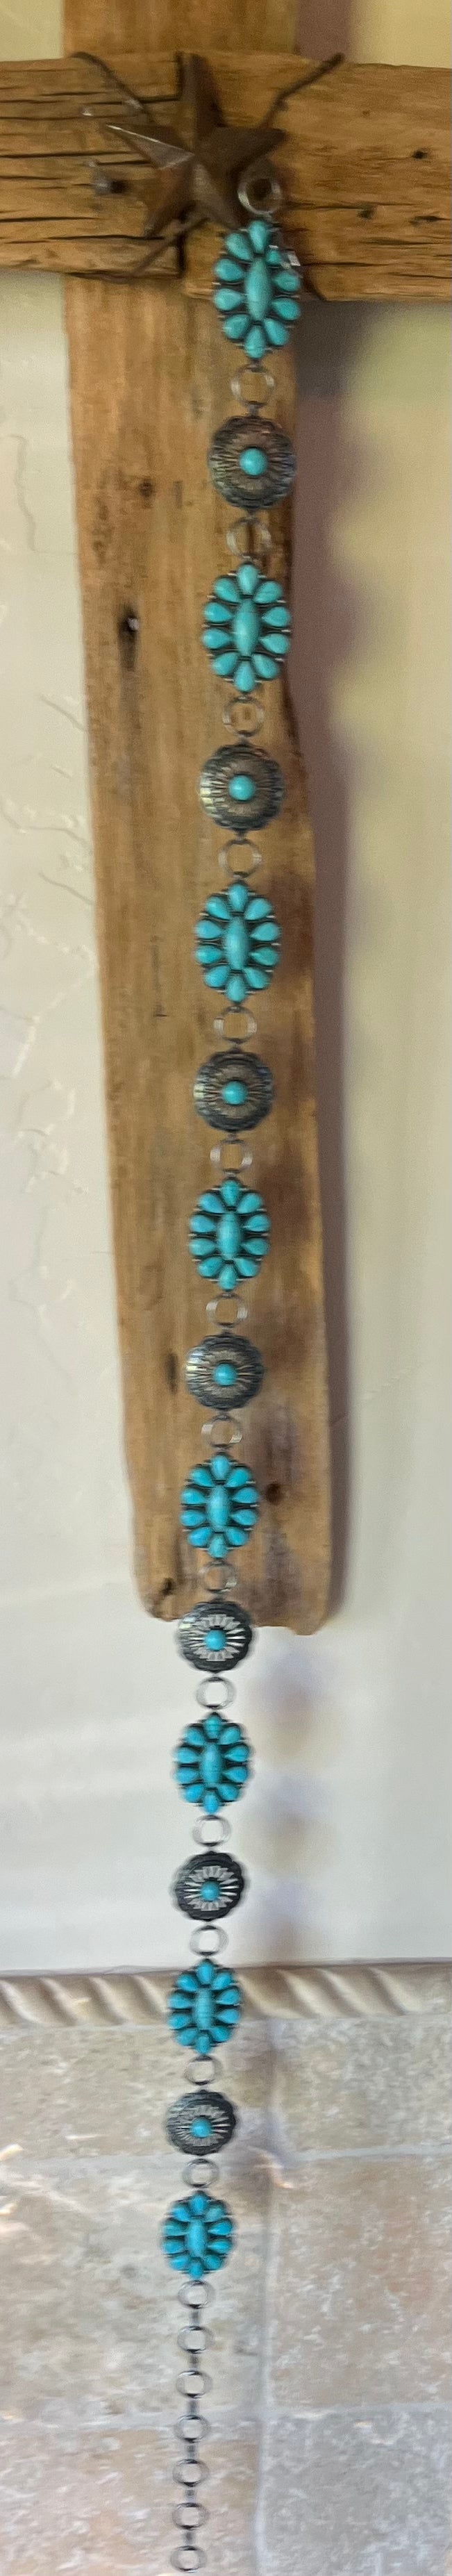 Concho Belt - colored stone and pewter metal